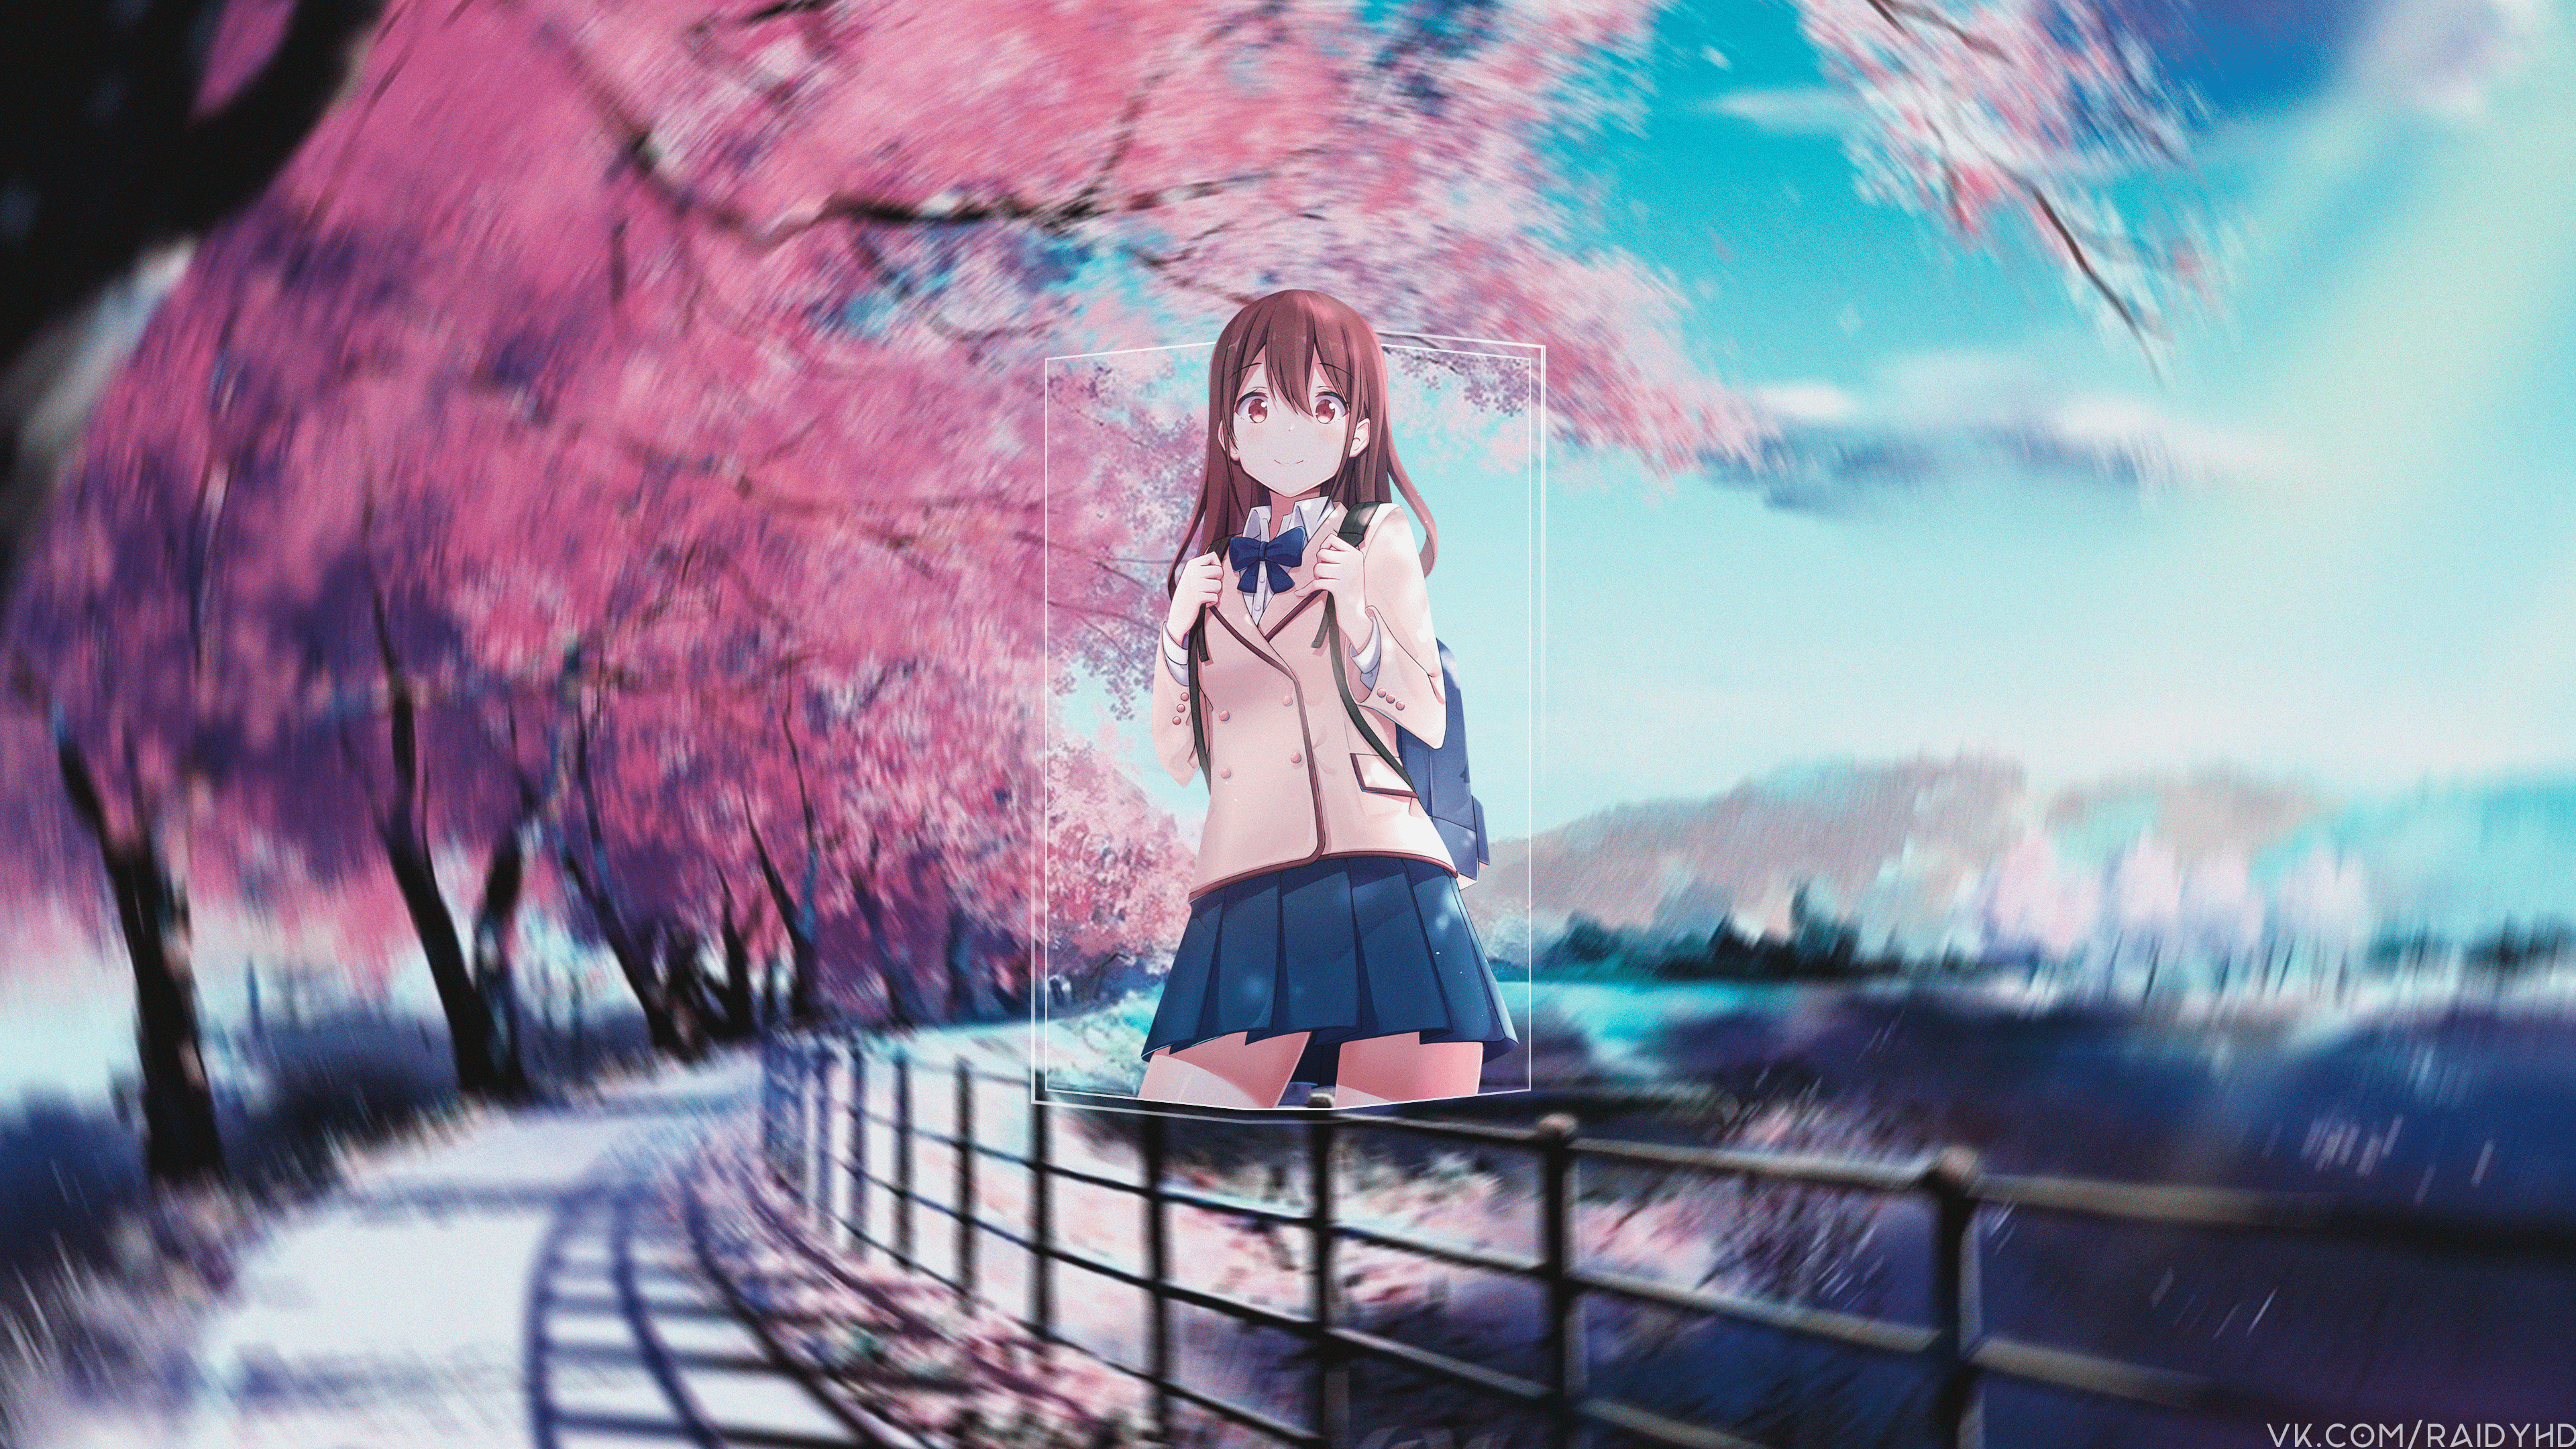 Anime 3840x2160 anime cherry blossom blurry background blurred schoolgirl school uniform picture-in-picture skirt backpacks anime girls looking at viewer trees sky clouds frills watermarked bow tie